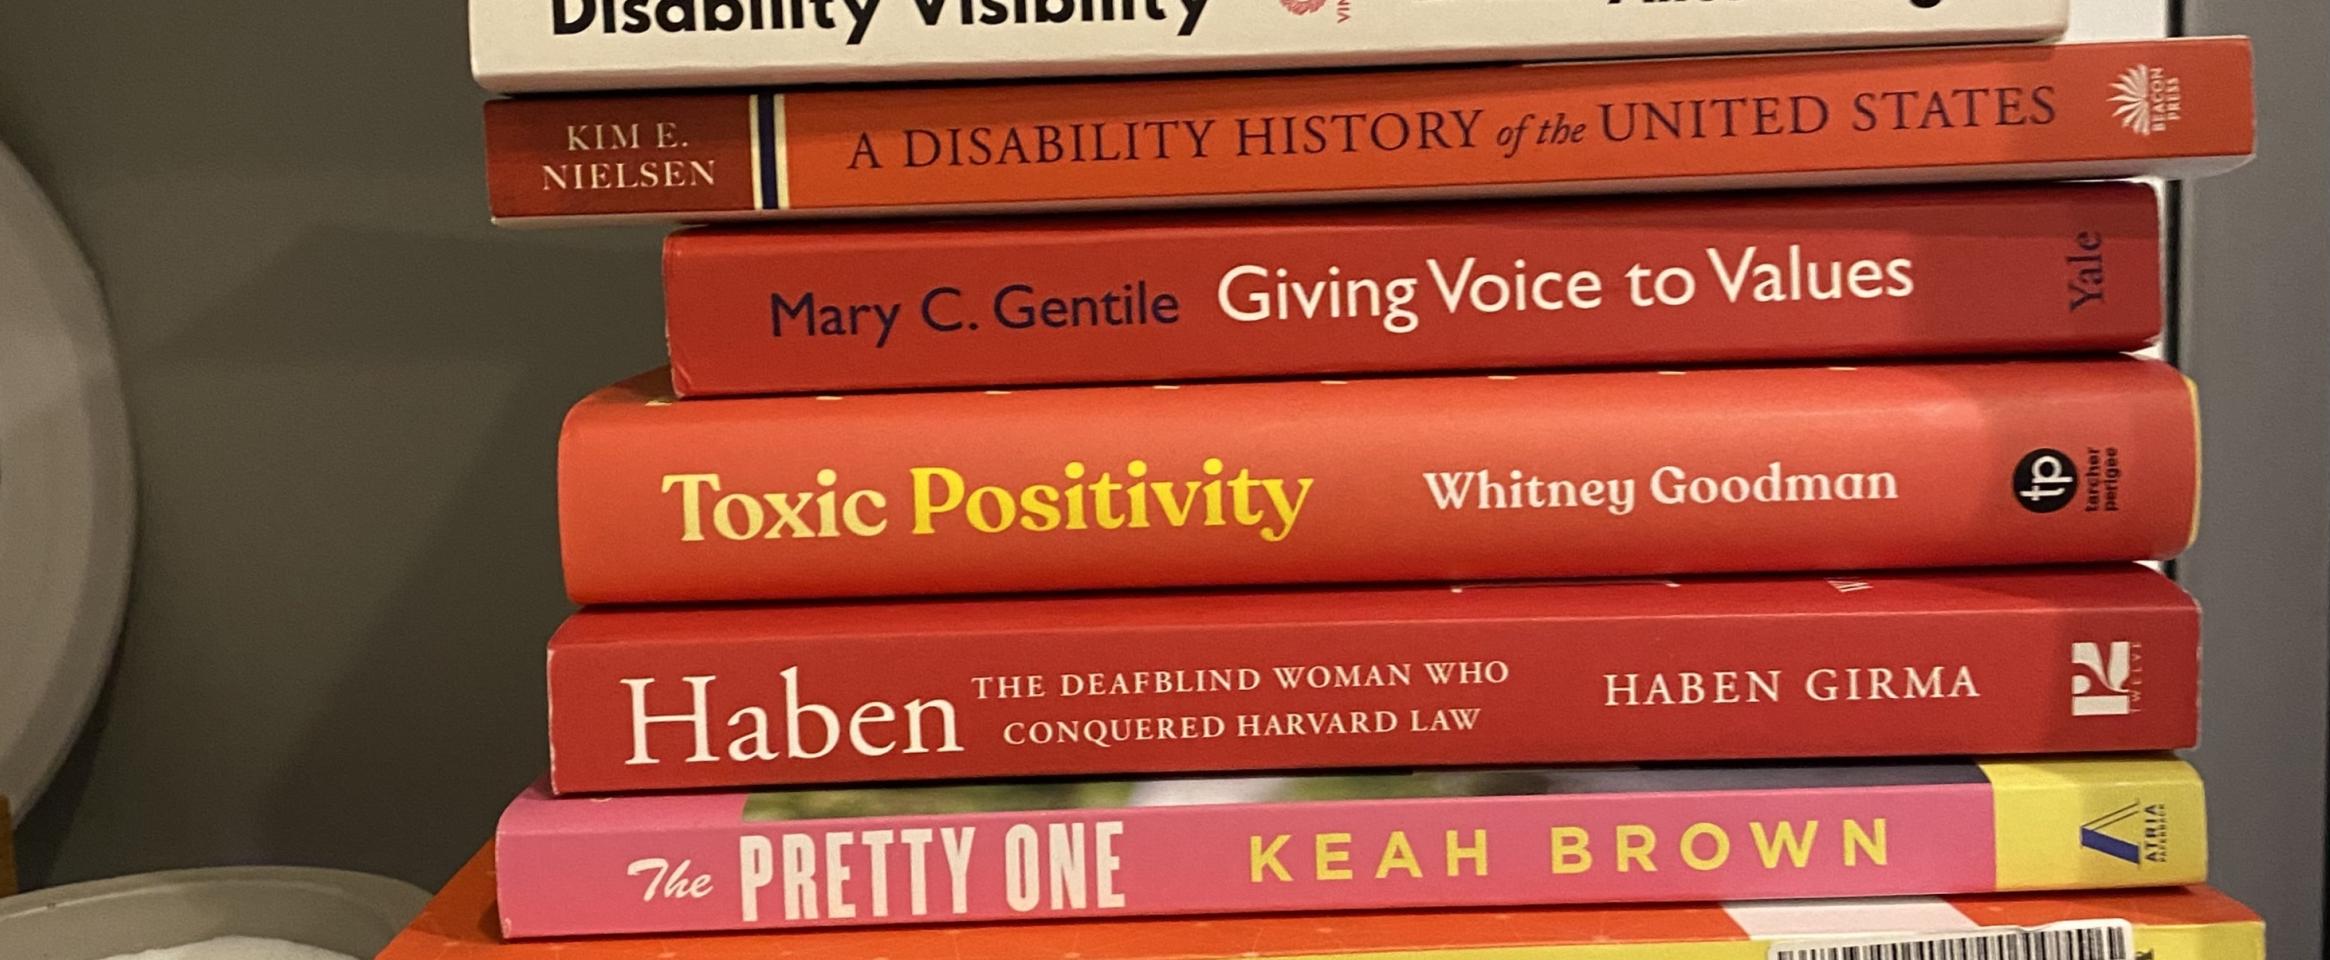 Rectangular photo of Gabi Serrato Marks’ office bookshelf showing works on disability history and visibility, as well as science writing and science communication. Photo credit: Gabi Serrato Marks.